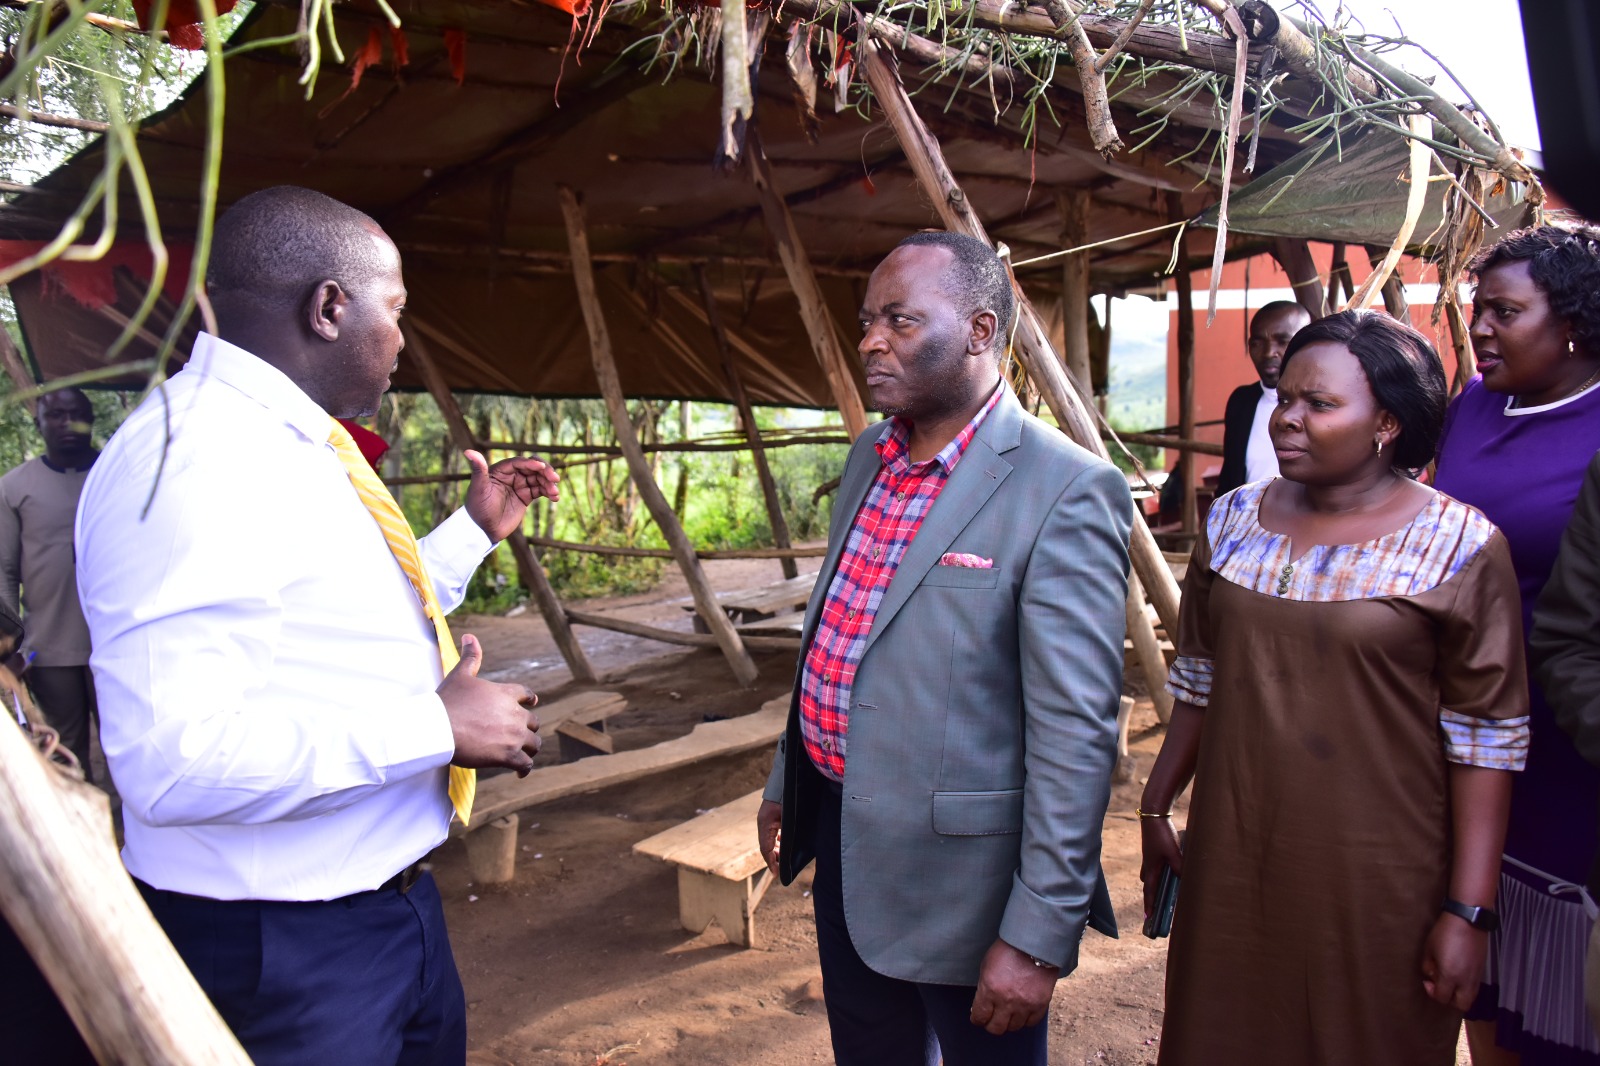 Mpuuga shocked by poor health, social services in Greater Masaka oversight tour